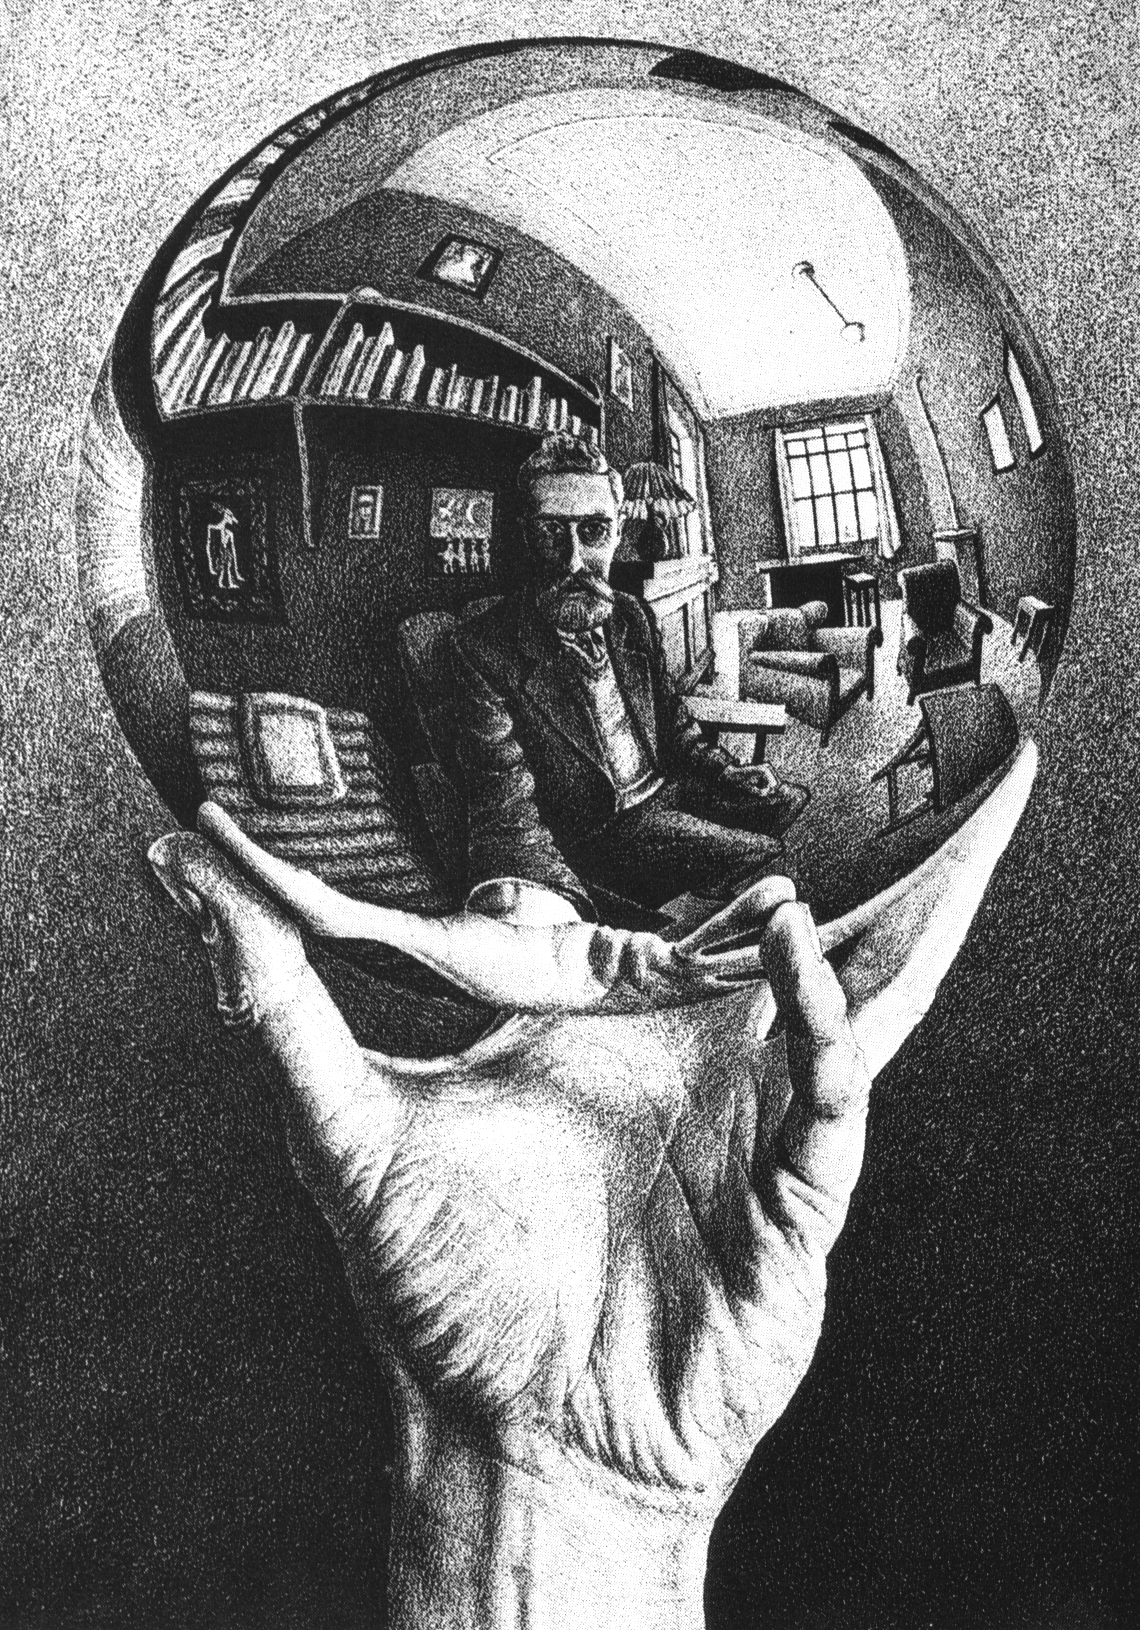 hand with reflecting sphere